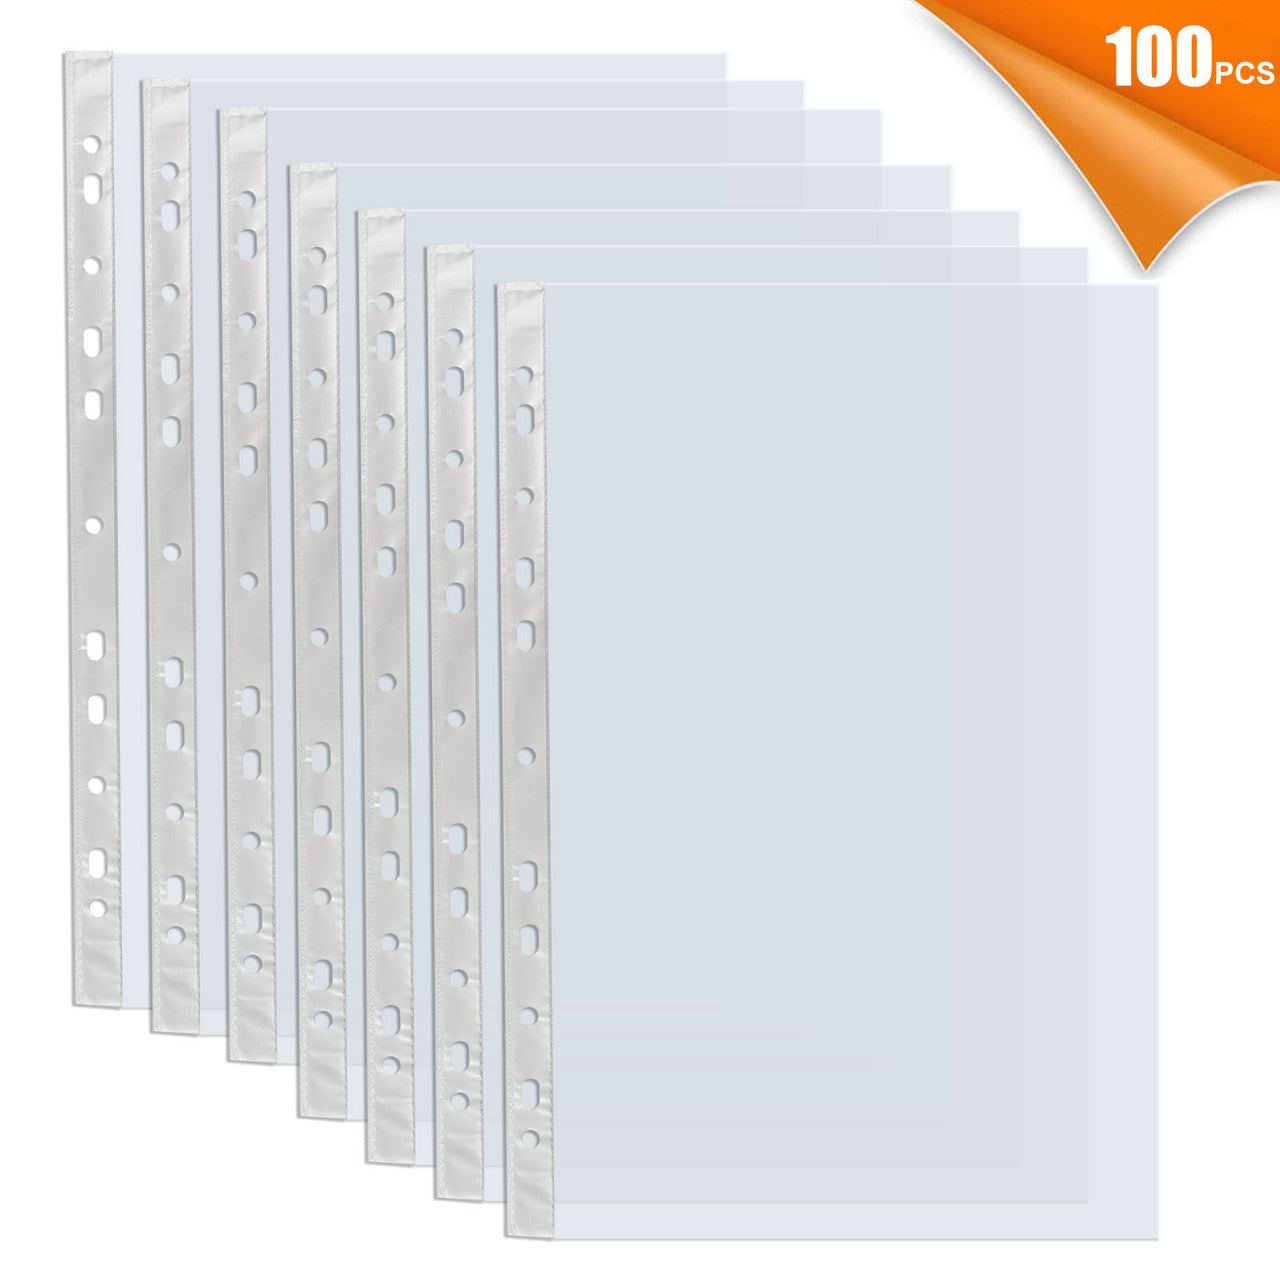 Sheet Protectors 9 x 12 Inches Clear Page Protectors with11 Holes, Plastic Sleeves for Binders, Top Loading Paper Protector Acid Free Letter Size, 100Pcs